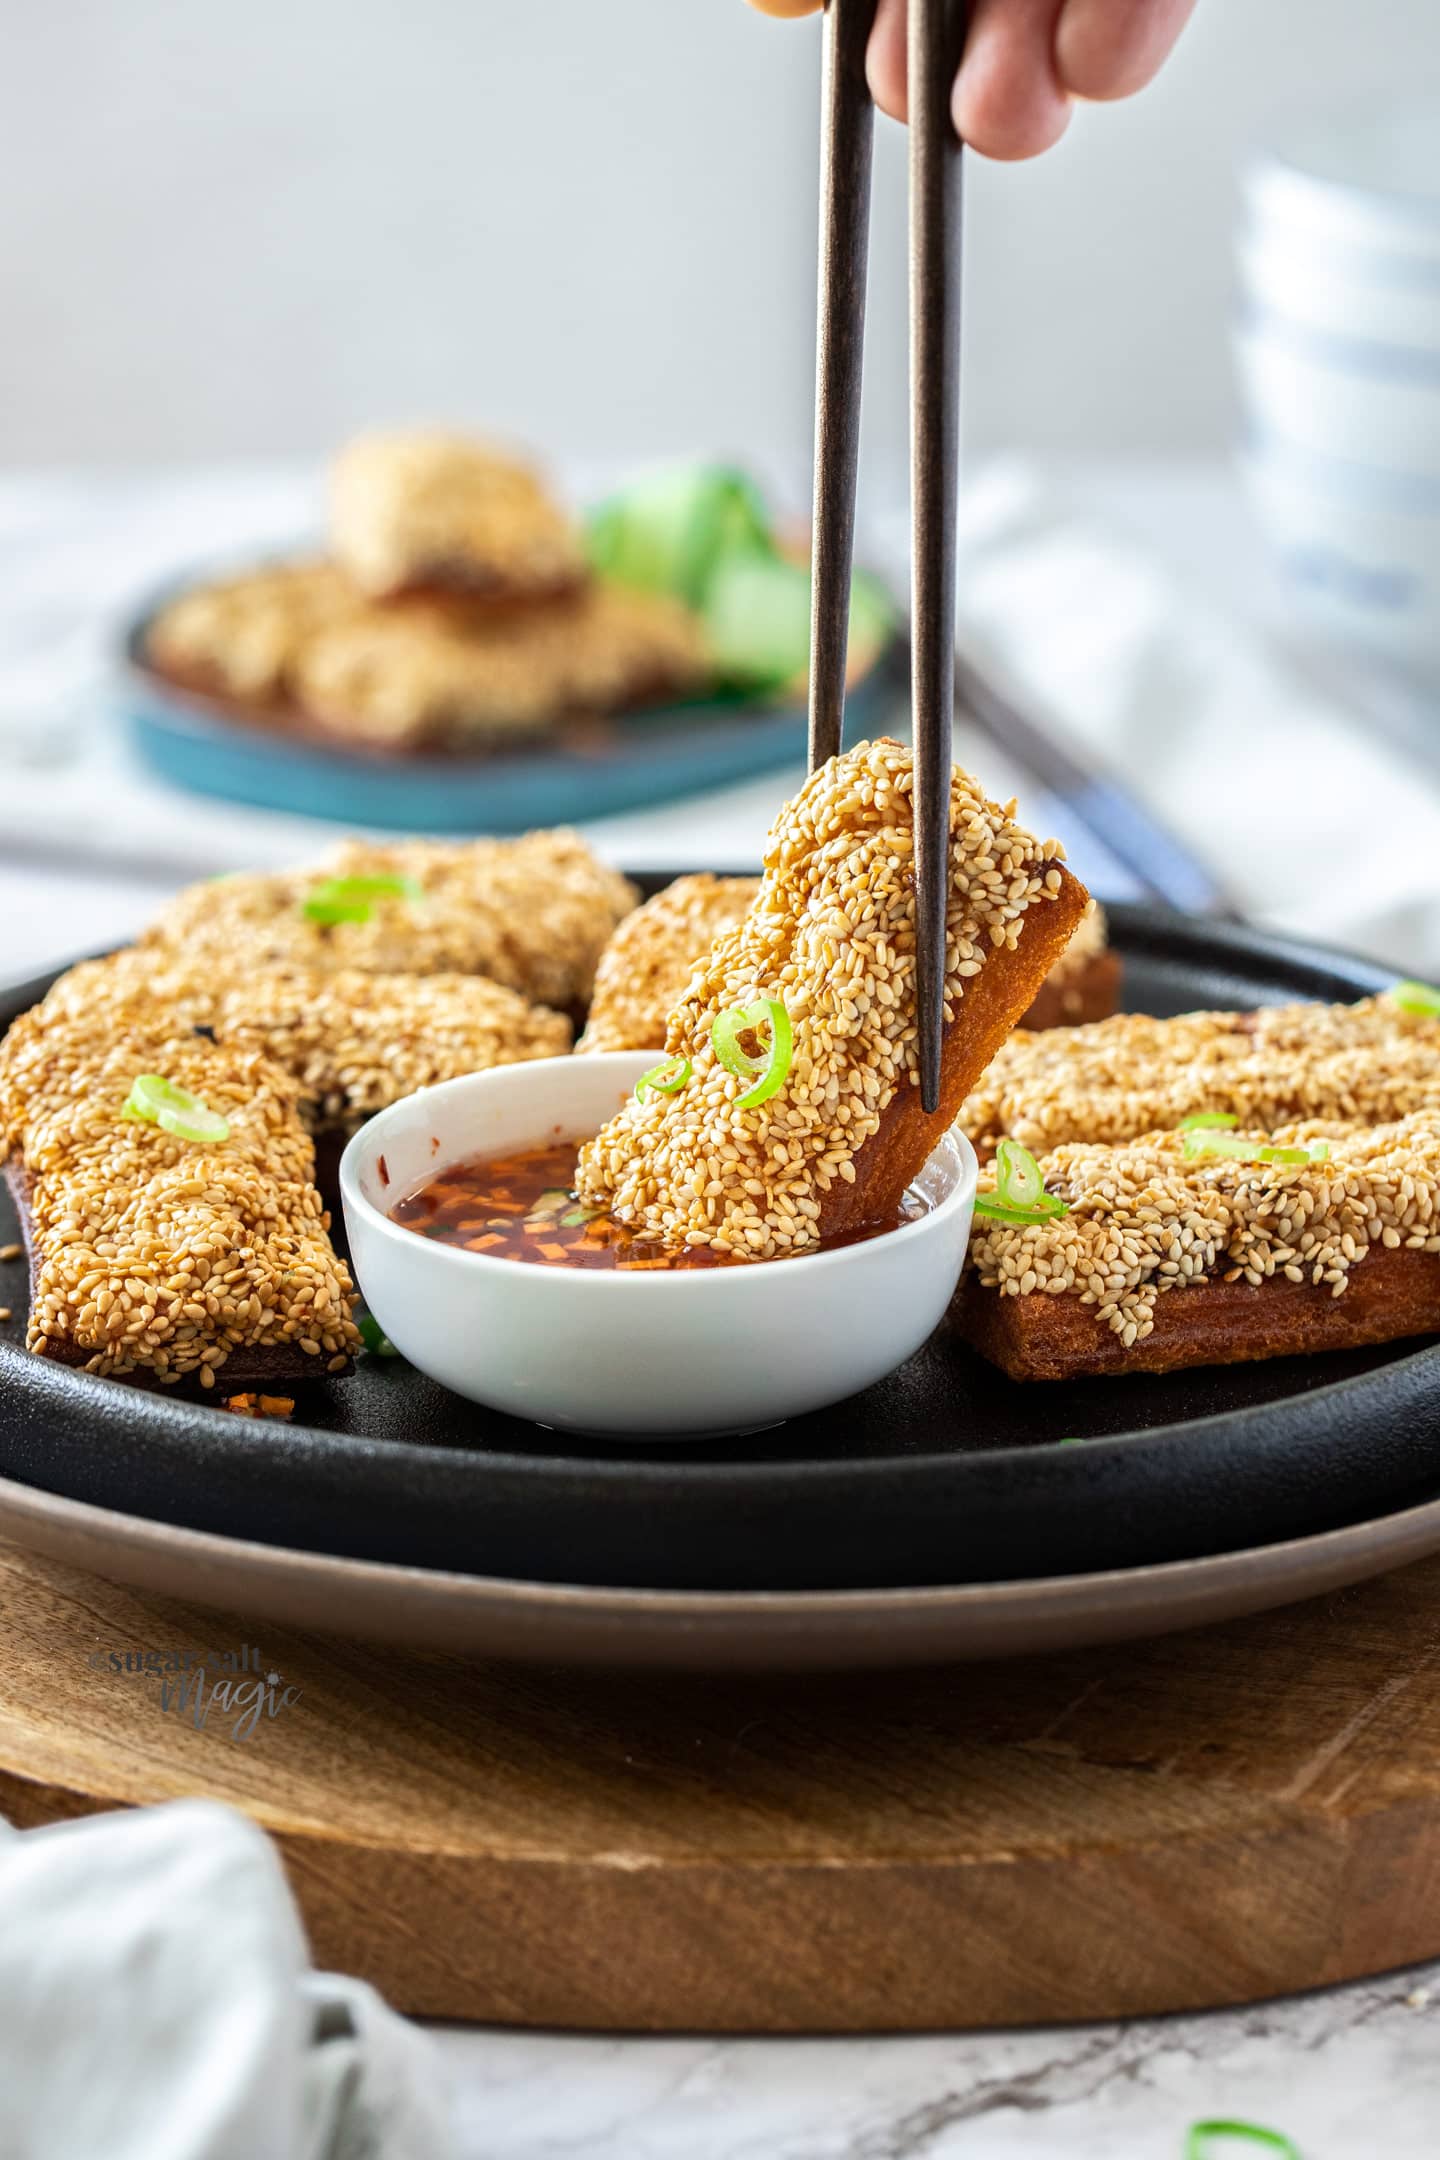 A slice of prawn toast being dipped into chilli sauce.